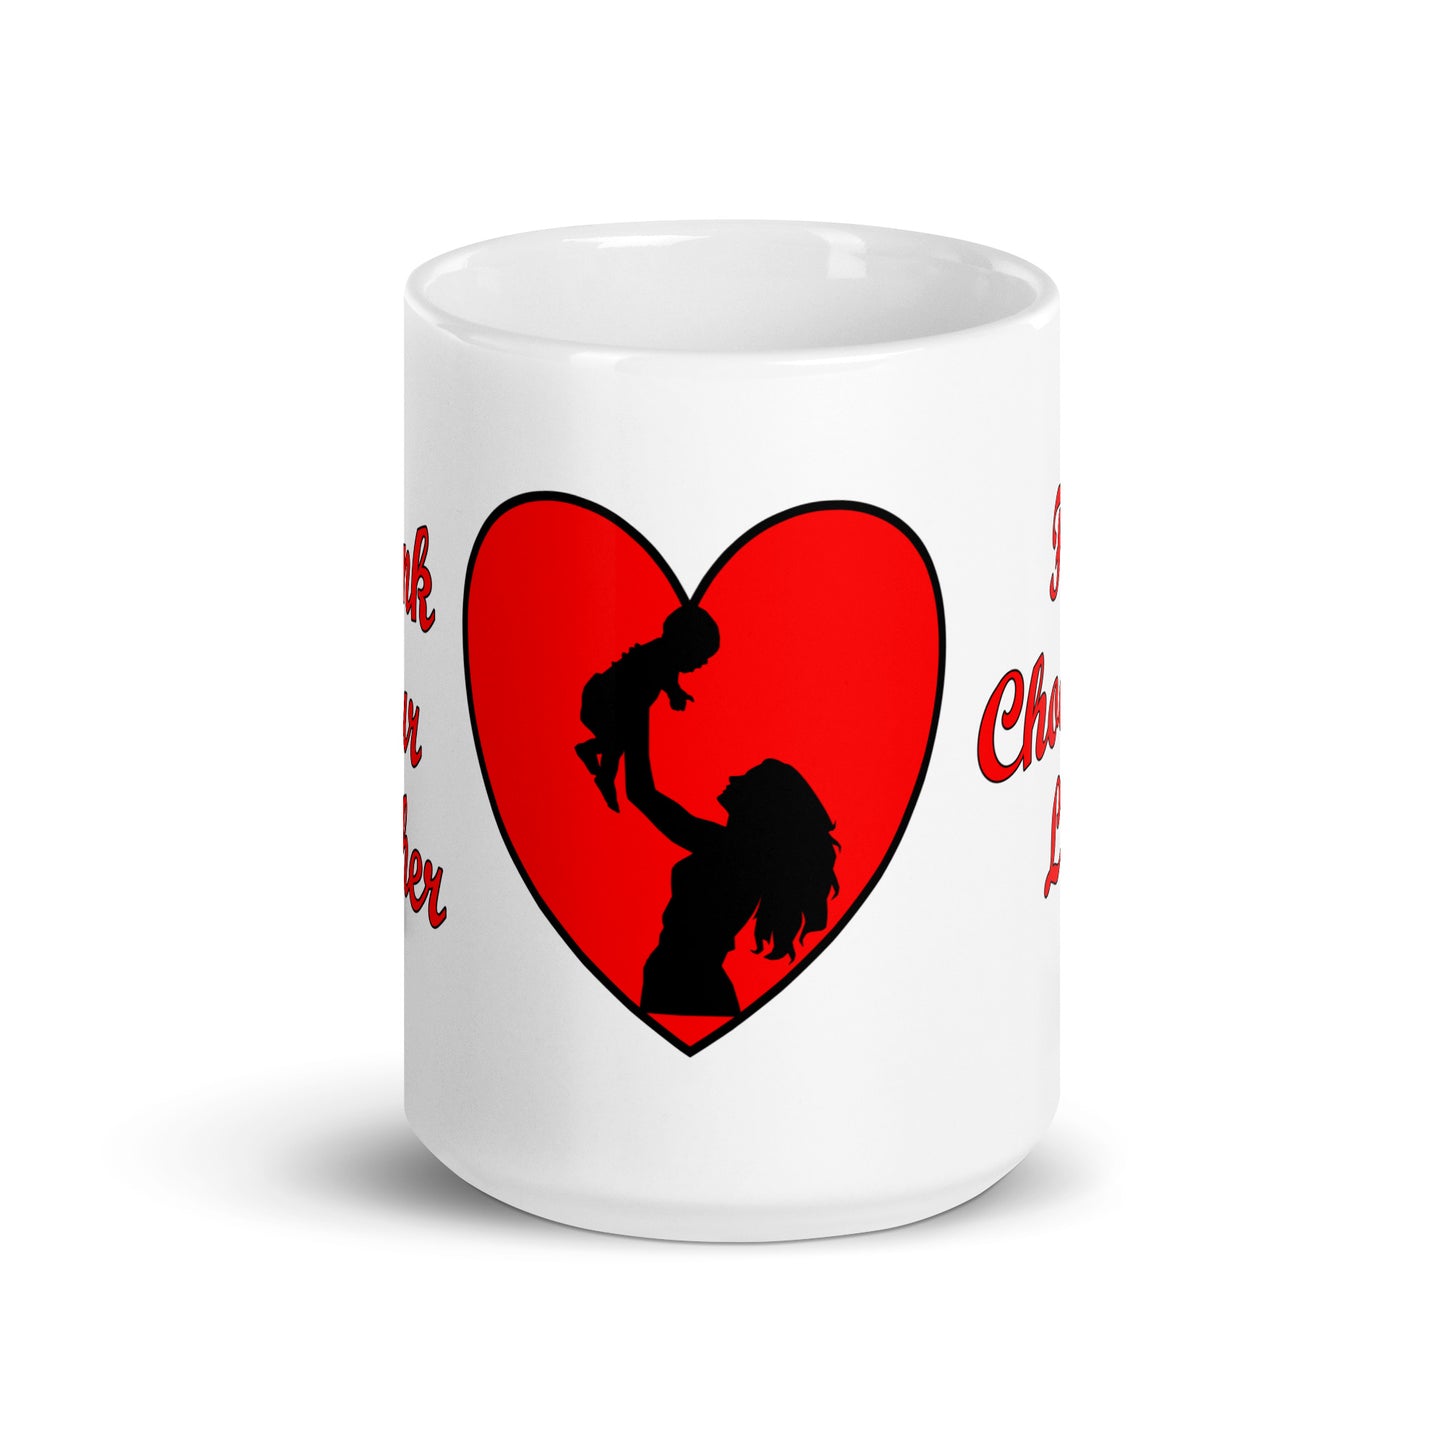 A002 Mug - White Glossy Ceramic Mug Featuring Mother and Baby Graphic with text “Thank Your Mother For Choosing Life.”